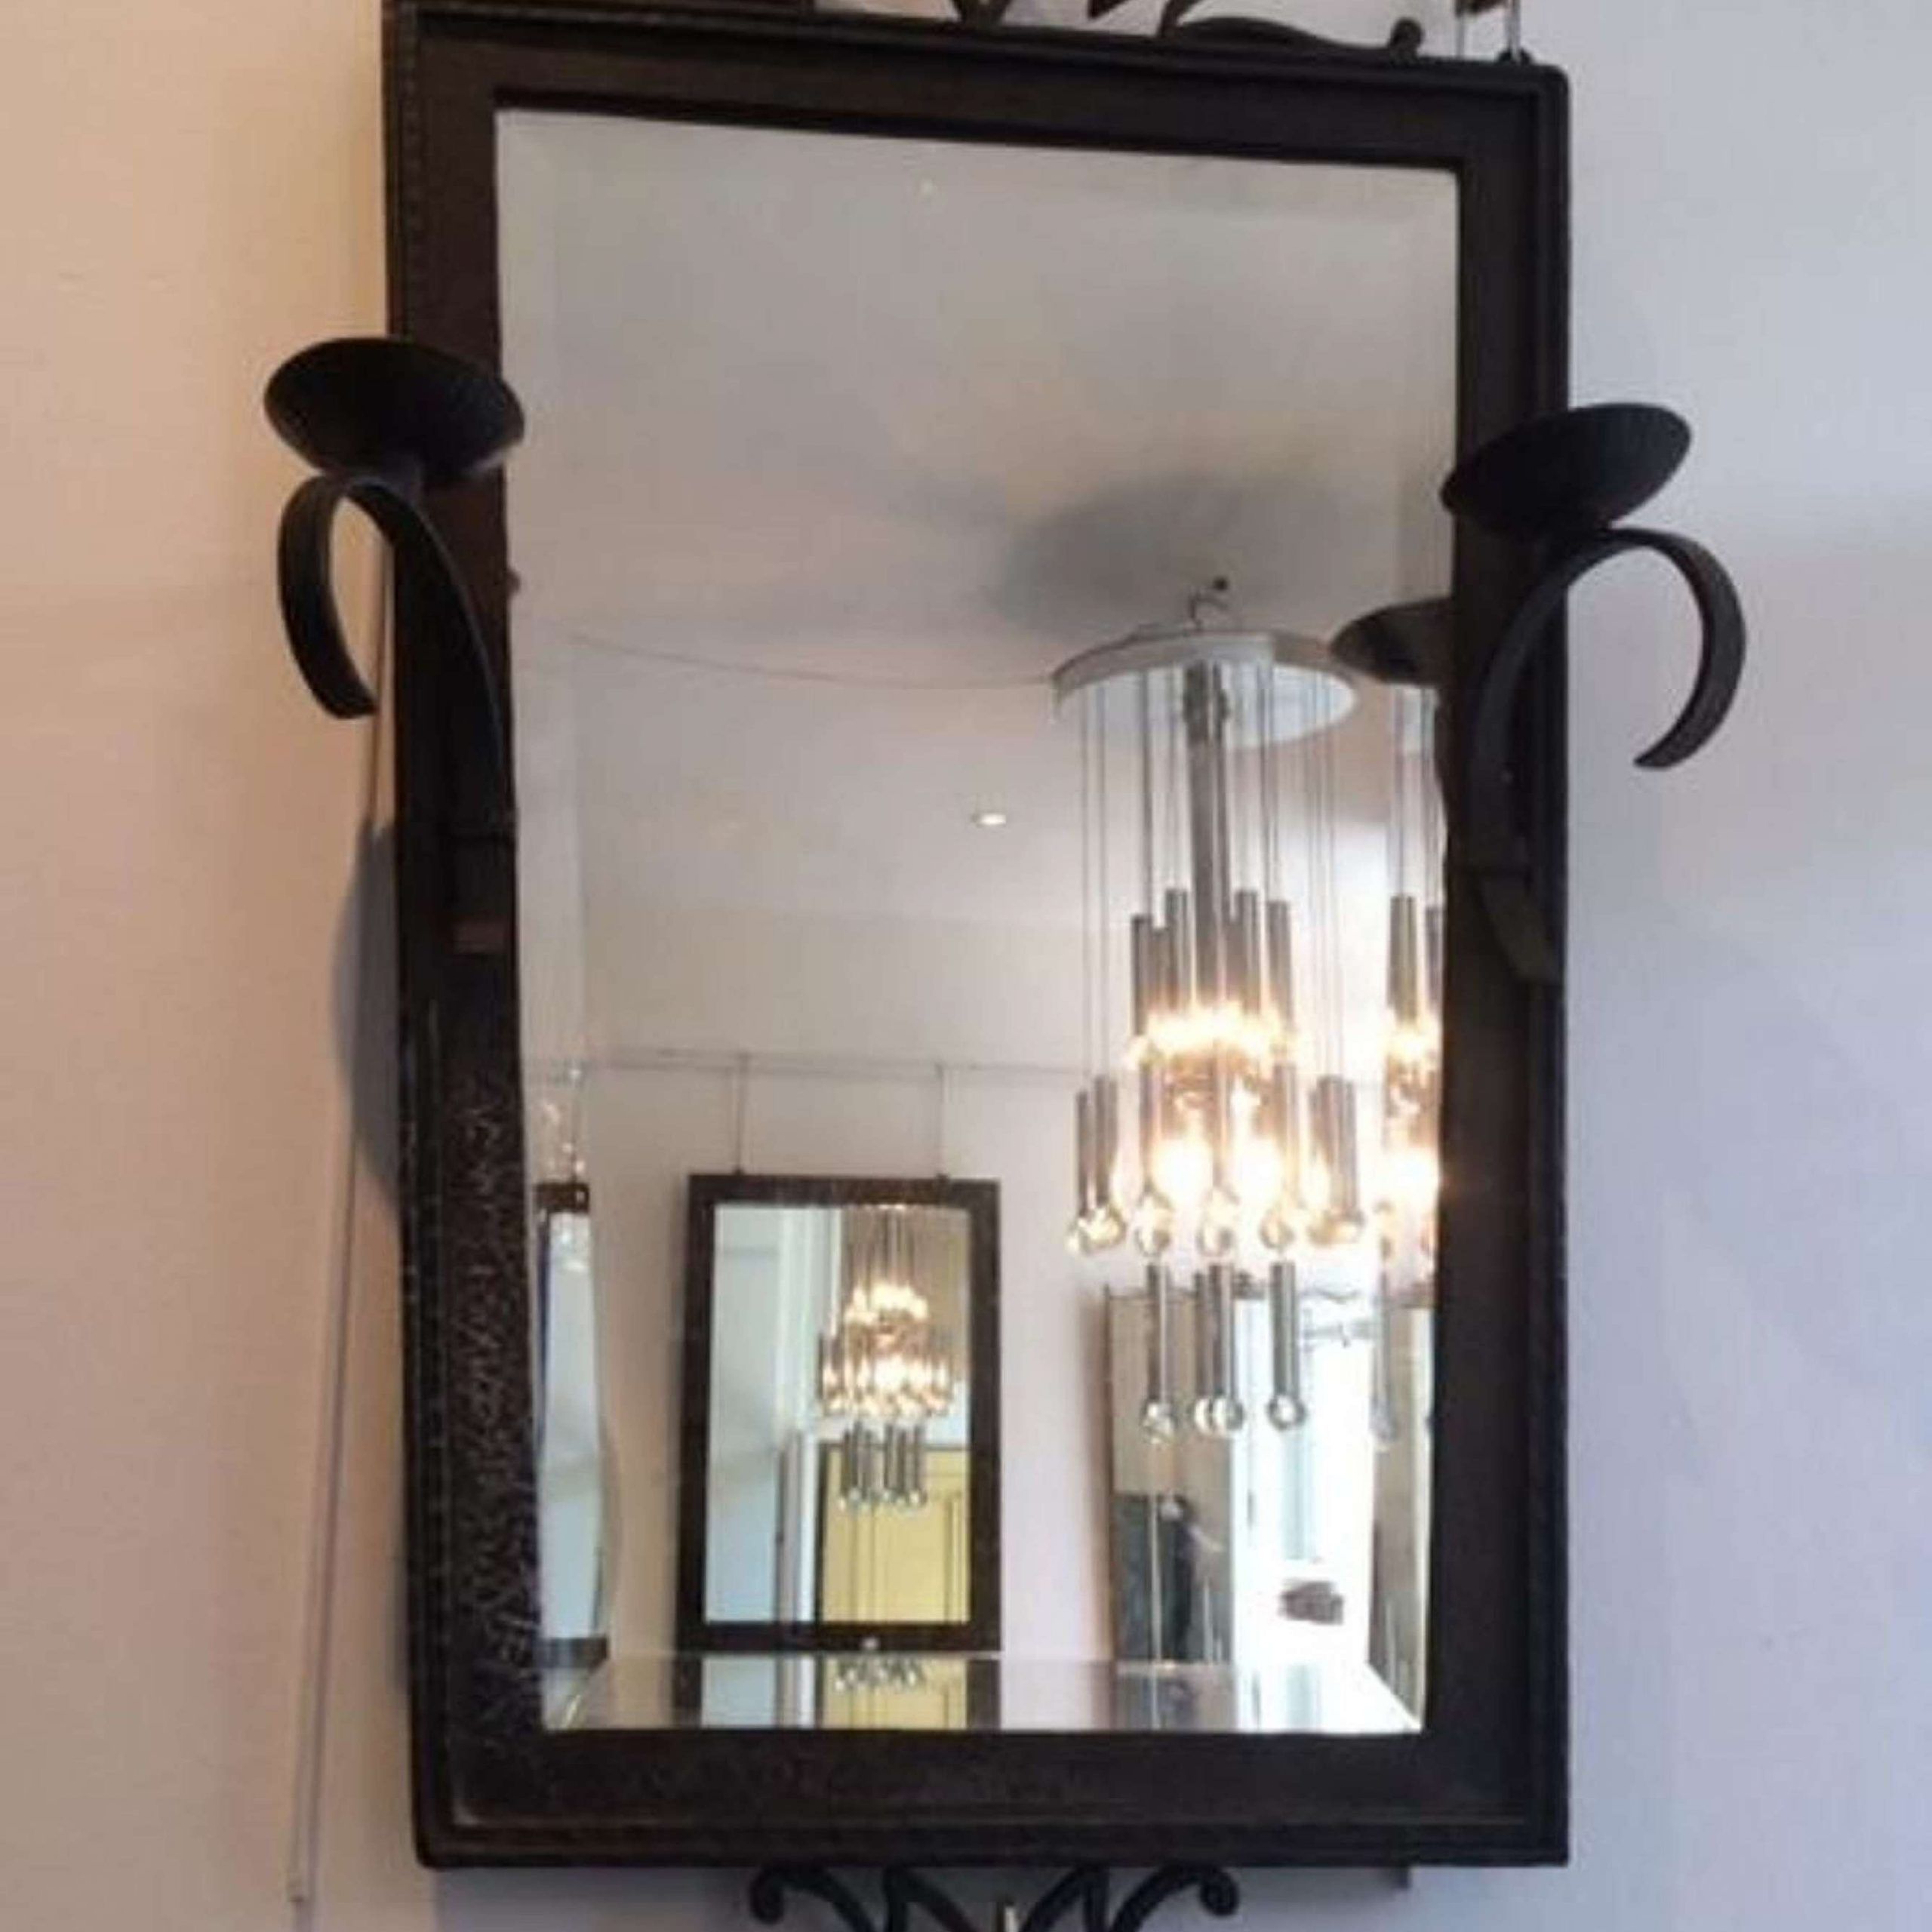 Pair Of Wrought Iron Framed Mirrors In Antique Wall Mirrors Intended For Iron Frame Handcrafted Wall Mirrors (View 11 of 15)